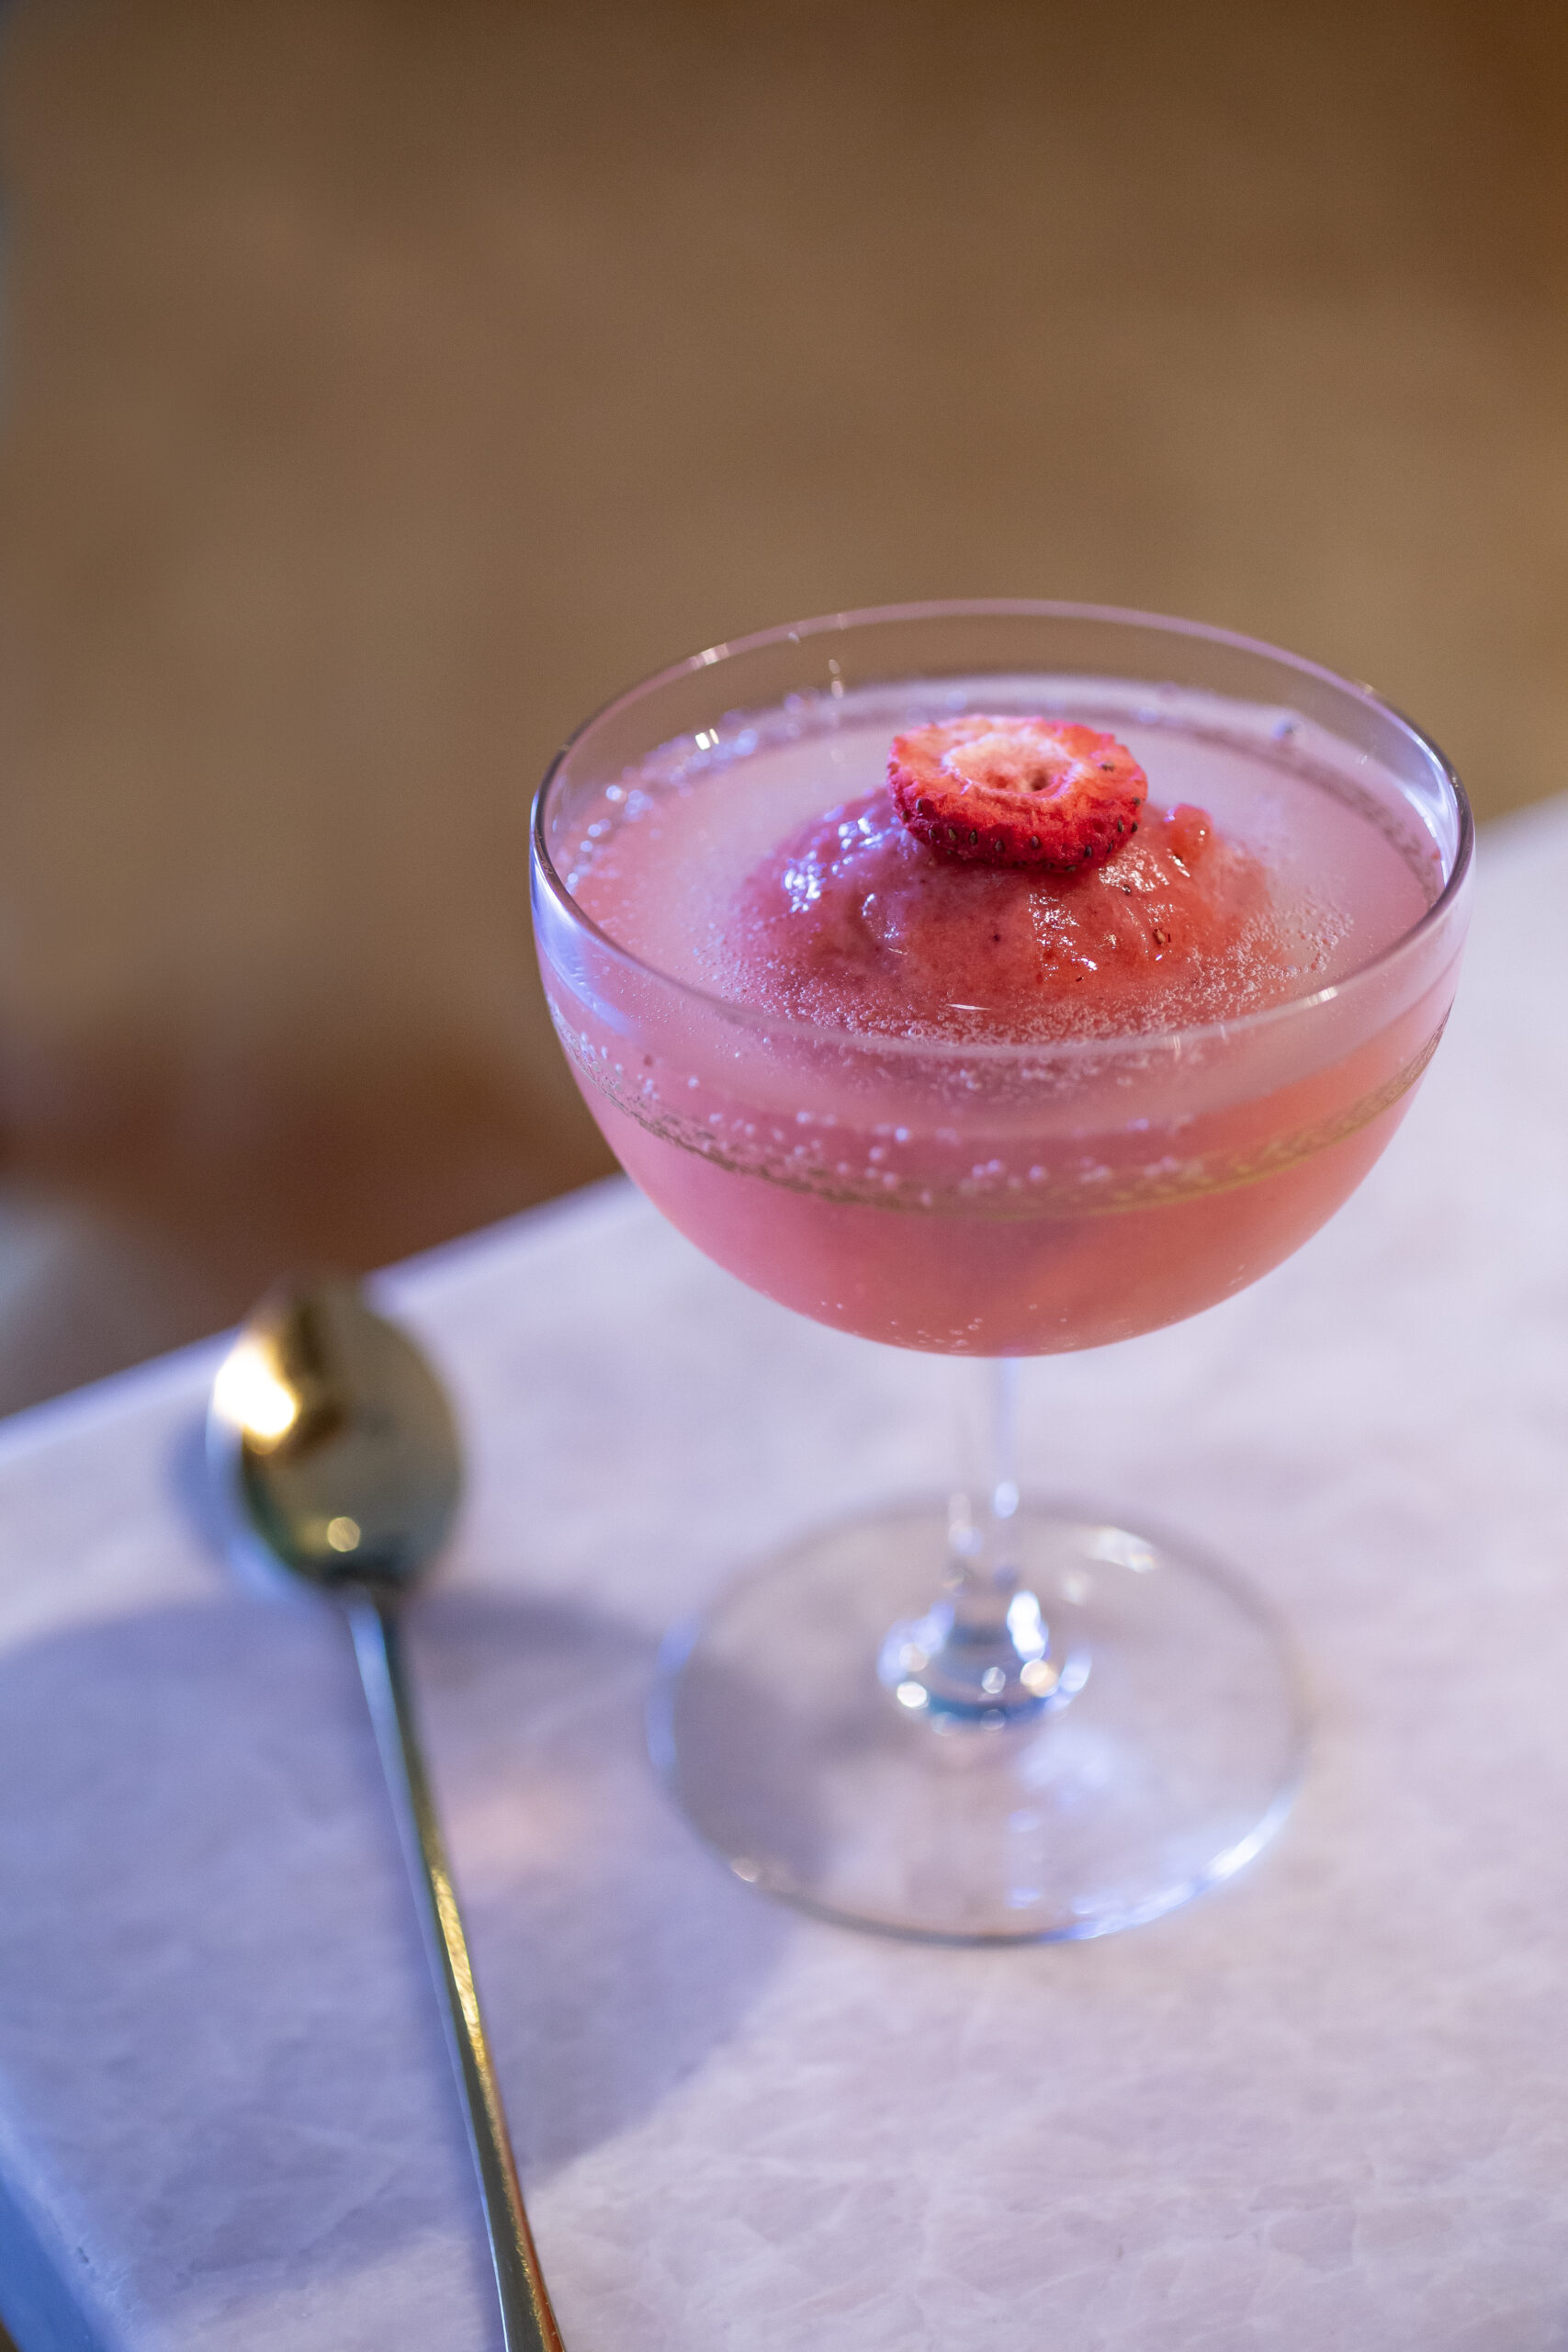 “Strawberry Letter” ice cream cocktail at Nimble and Finn’s. It’s strawberry sorbet with vermouth, elderflower, and champagne, May 18, in Santa Rosa’s Railroad Square (Chad Surmick / The Press Democrat)